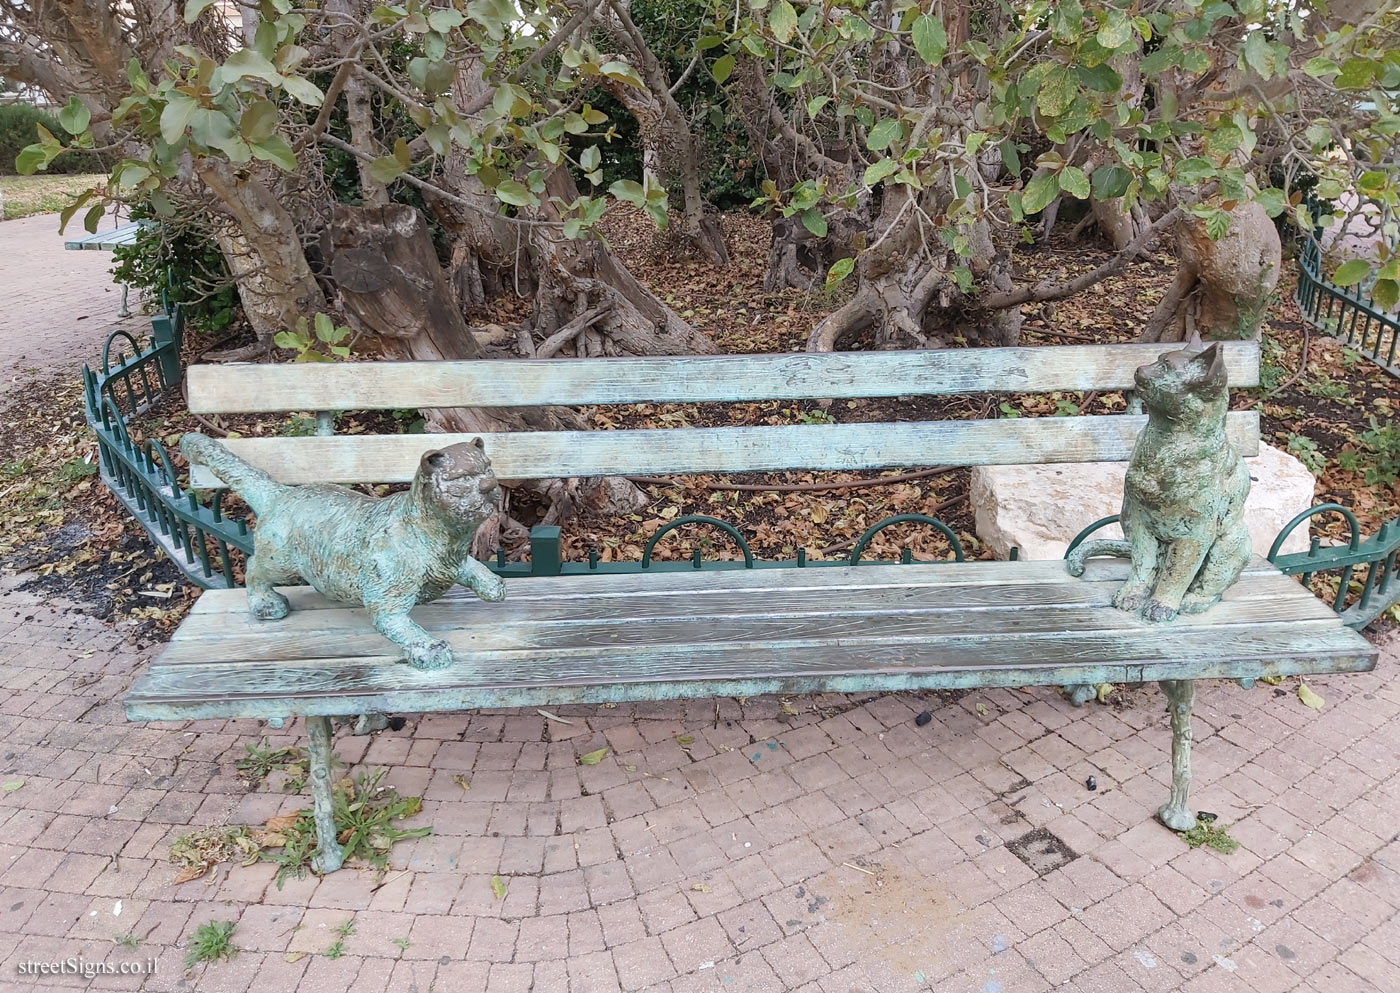 Holon - Story Garden - Two cats on one bench - Nurit St 9, Holon, Israel